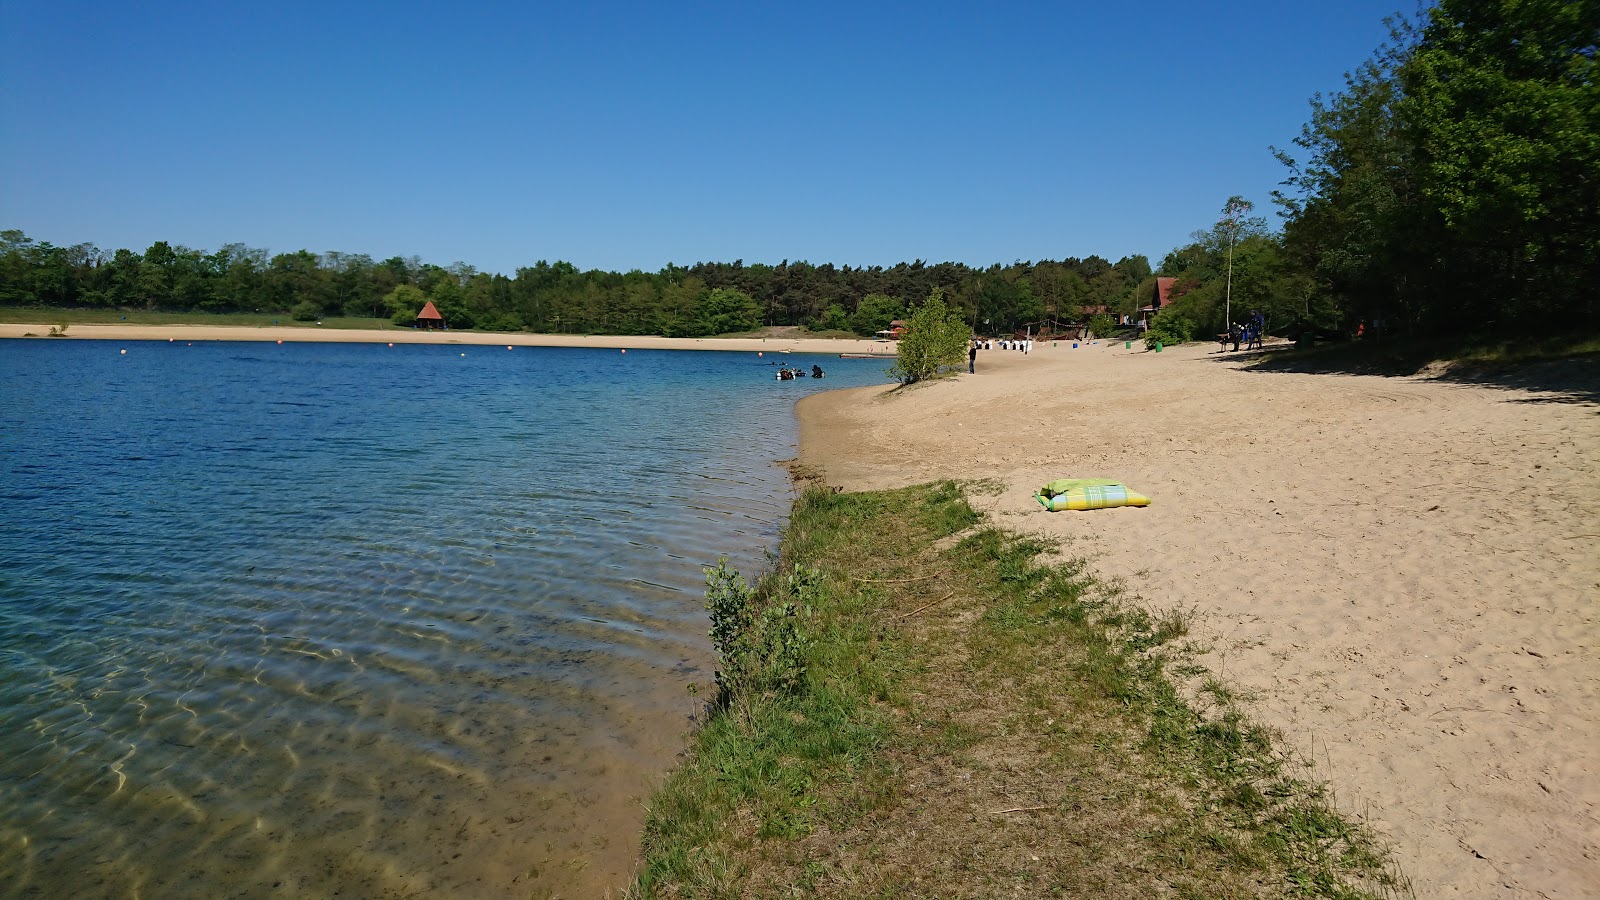 Photo of Heidesee Strand with spacious bay